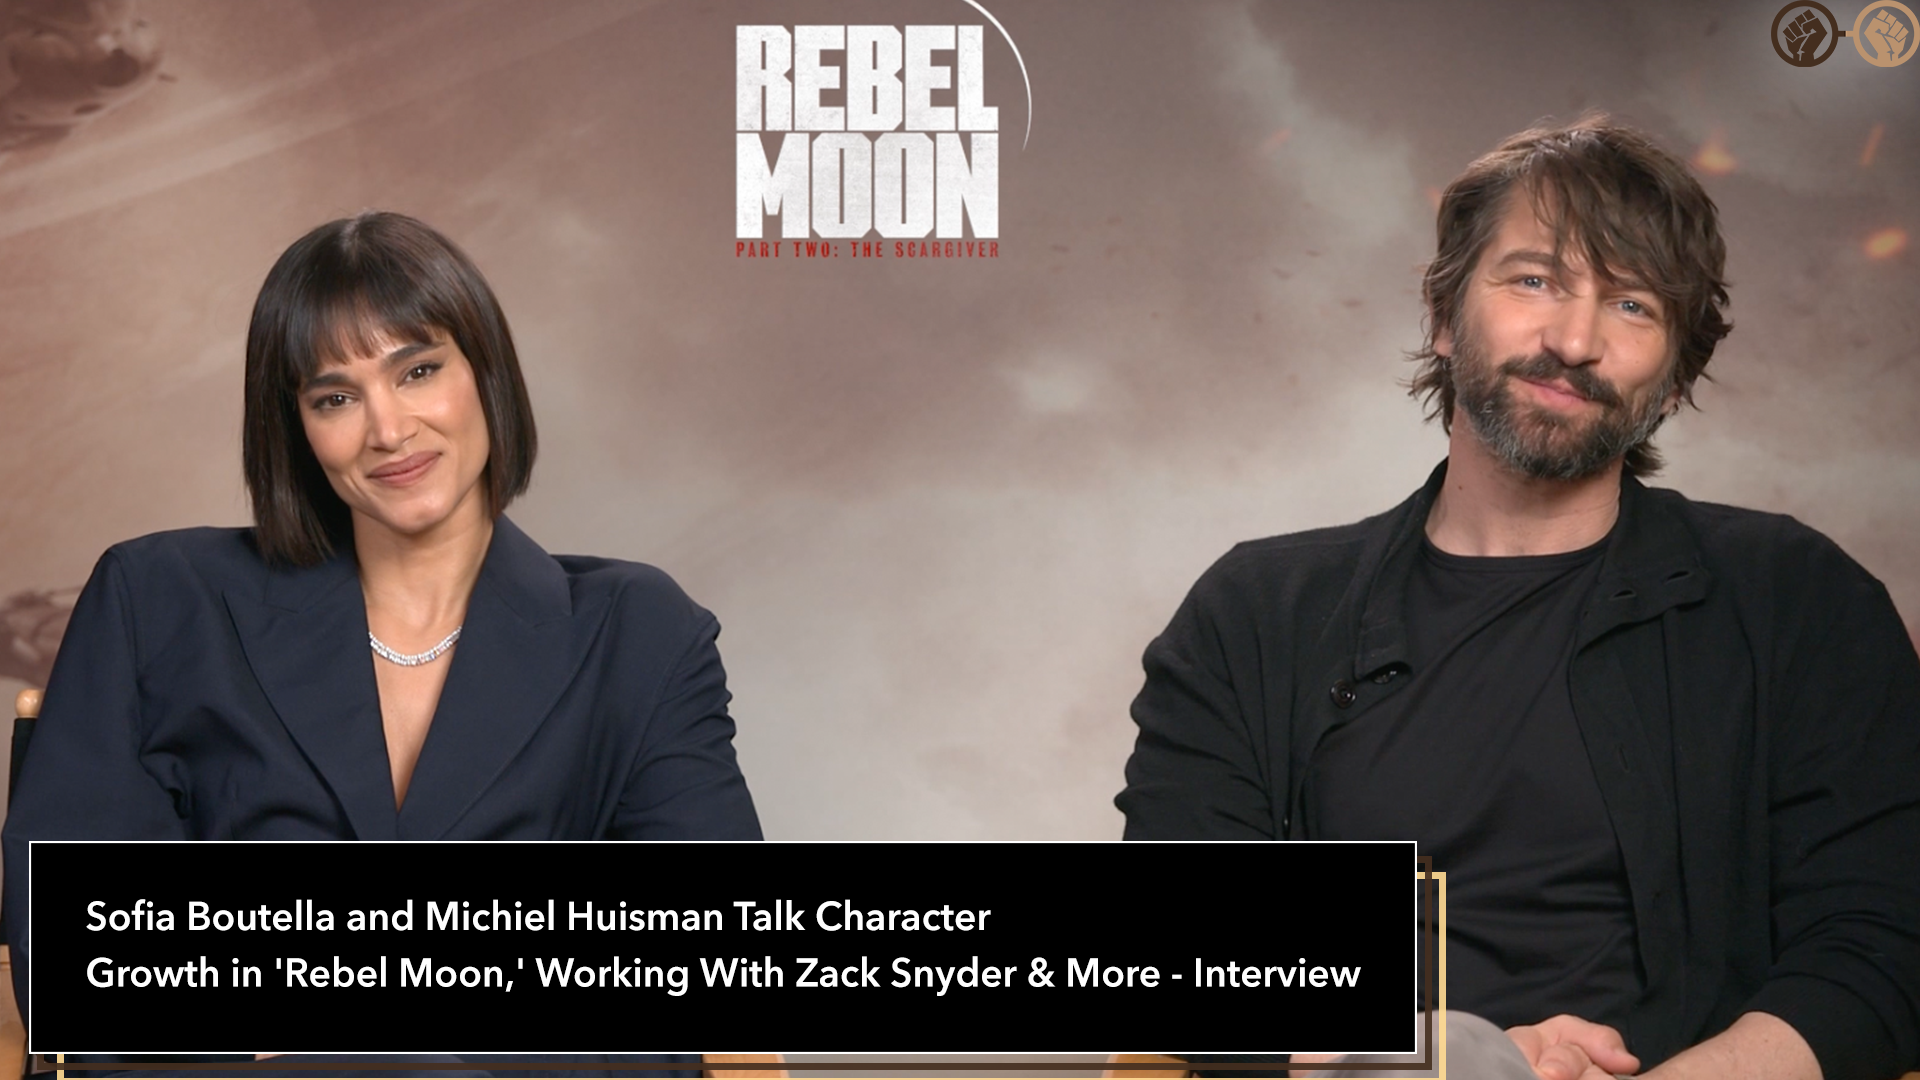 Sofia Boutella and Michiel Huisman Talk Character Growth in ‘Rebel Moon,’ Working With Zack Snyder & More – Interview